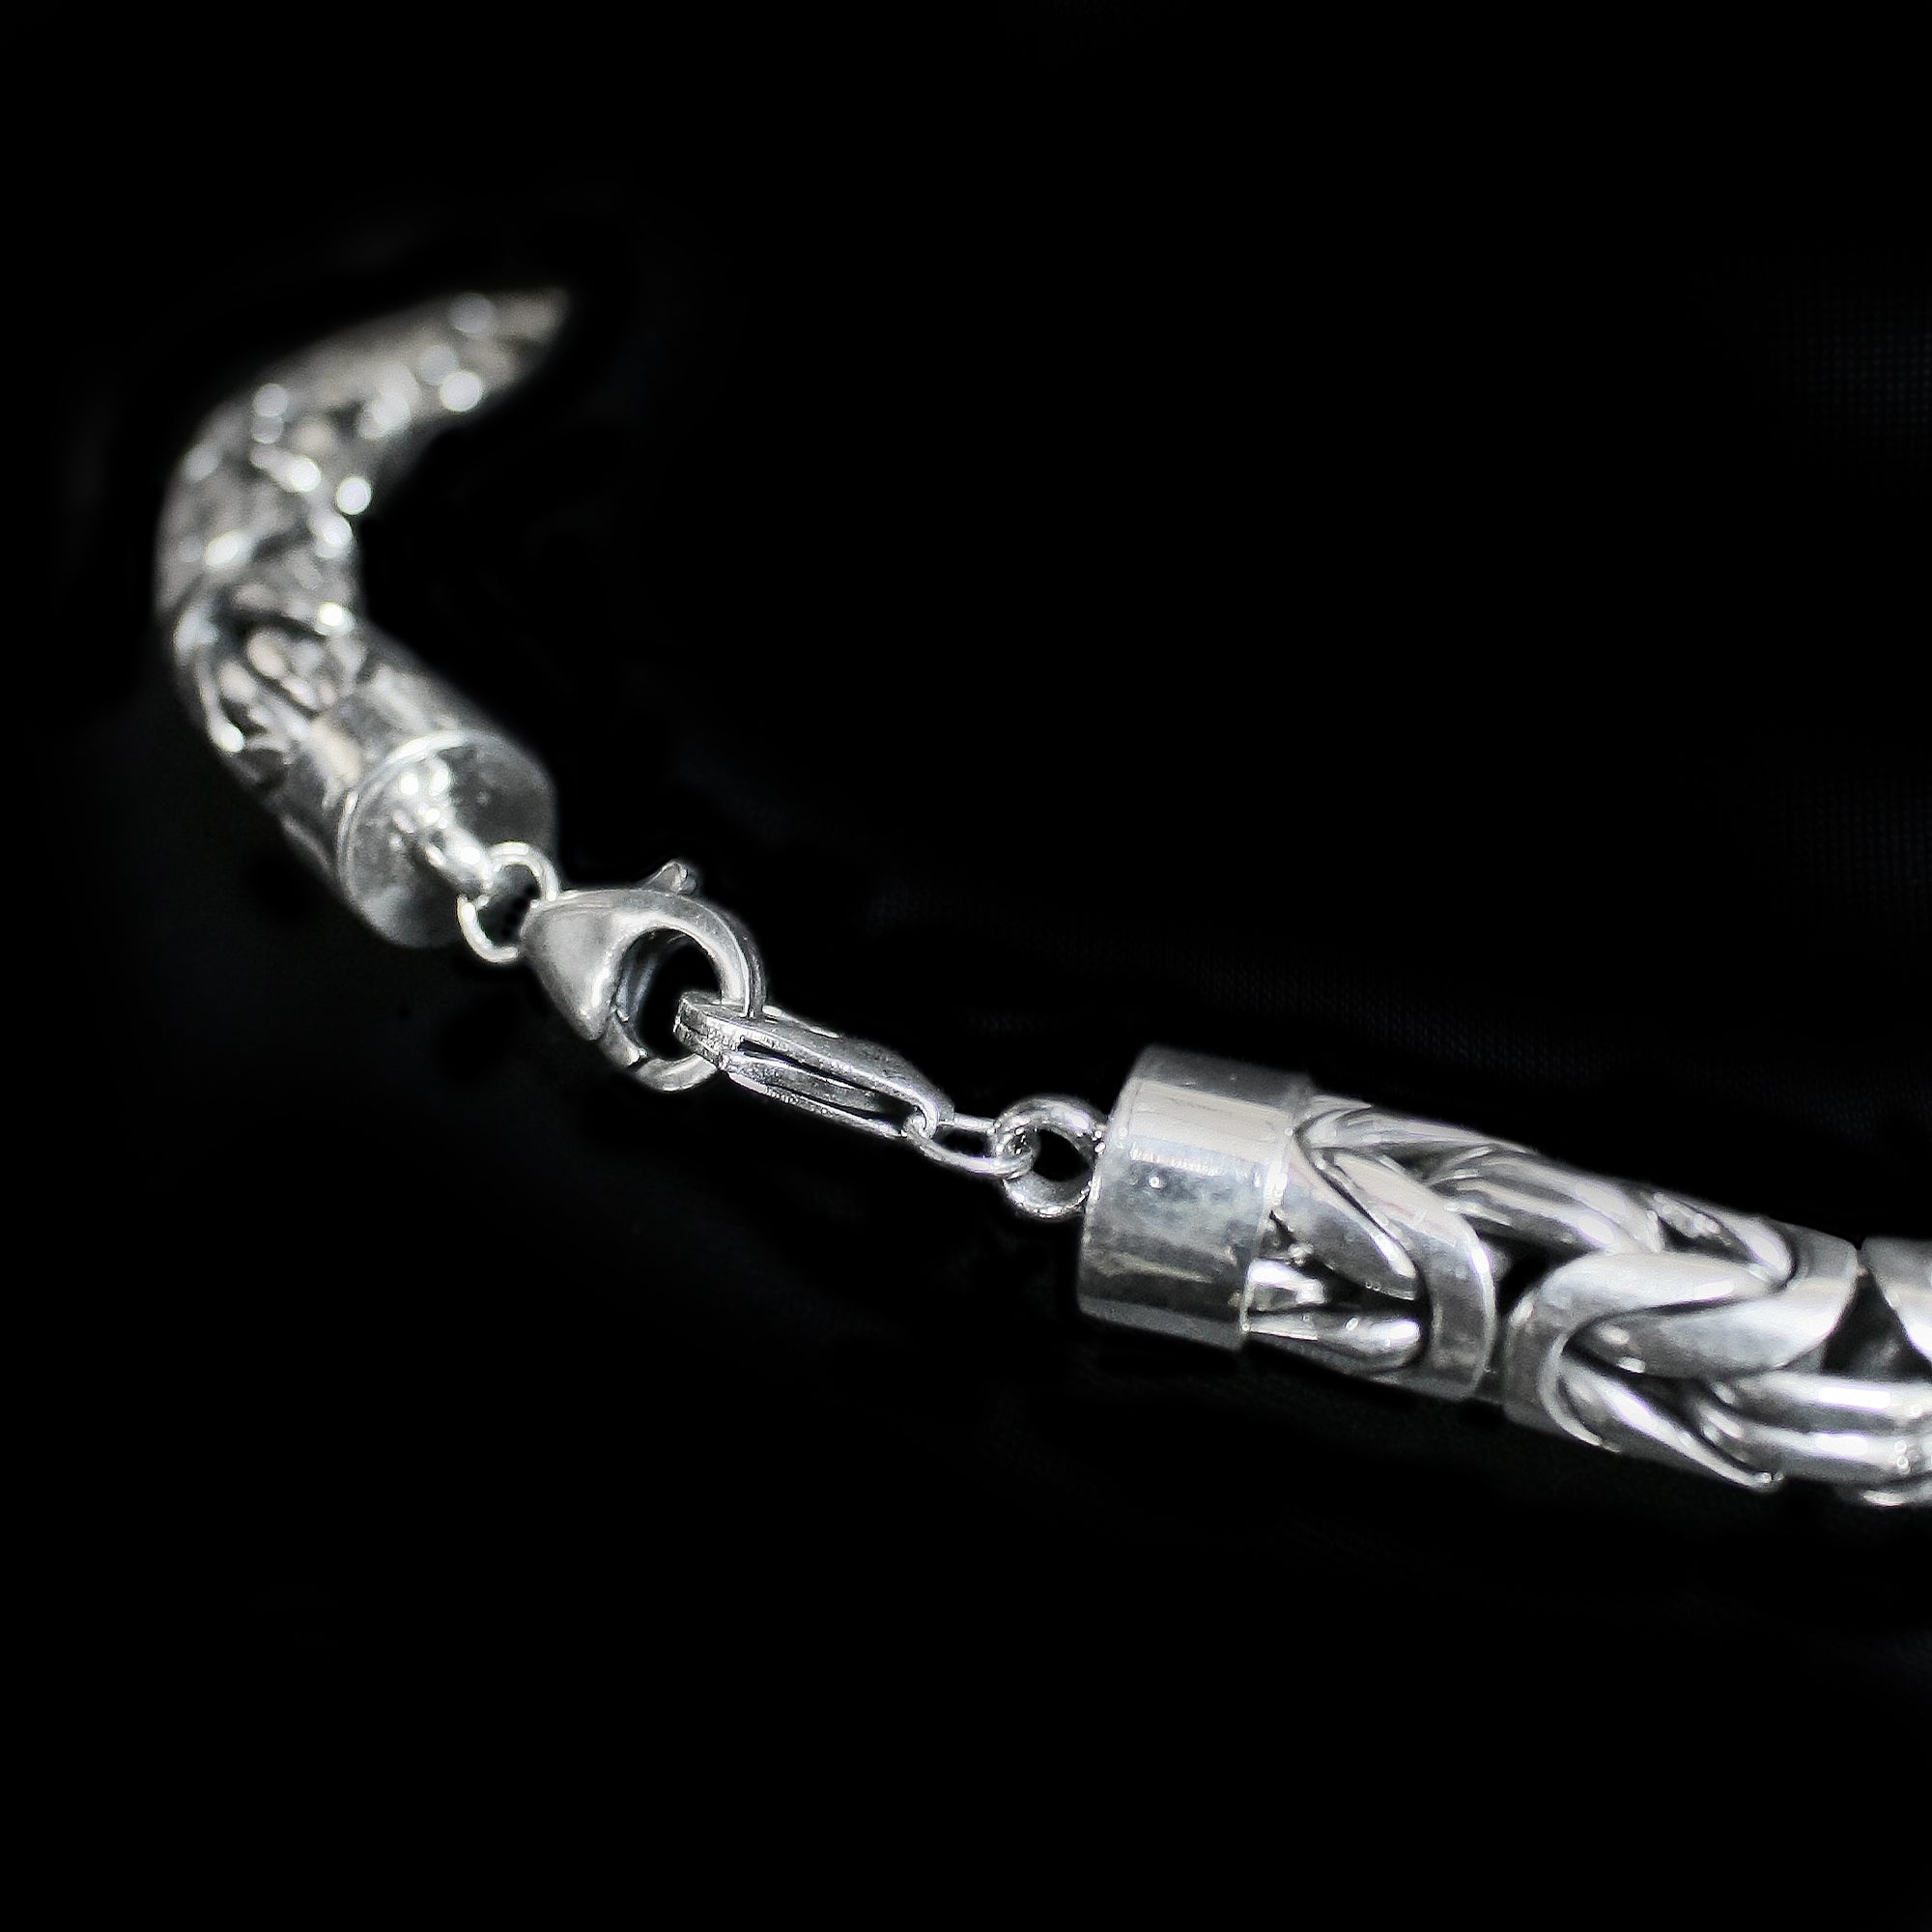 10mm Silver Double King Chain Necklace Back Closing Clasps